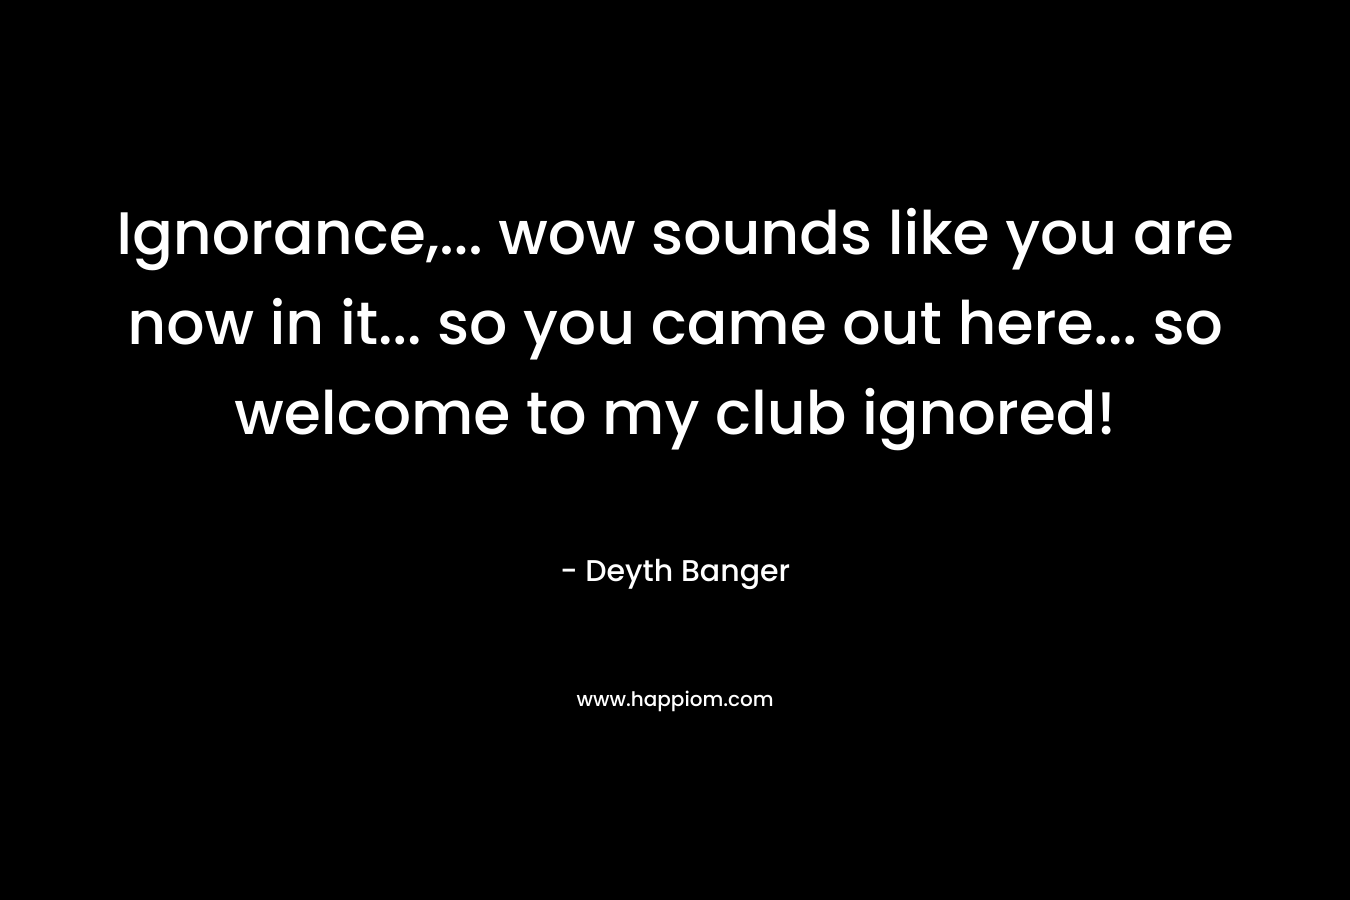 Ignorance,… wow sounds like you are now in it… so you came out here… so welcome to my club ignored! – Deyth Banger